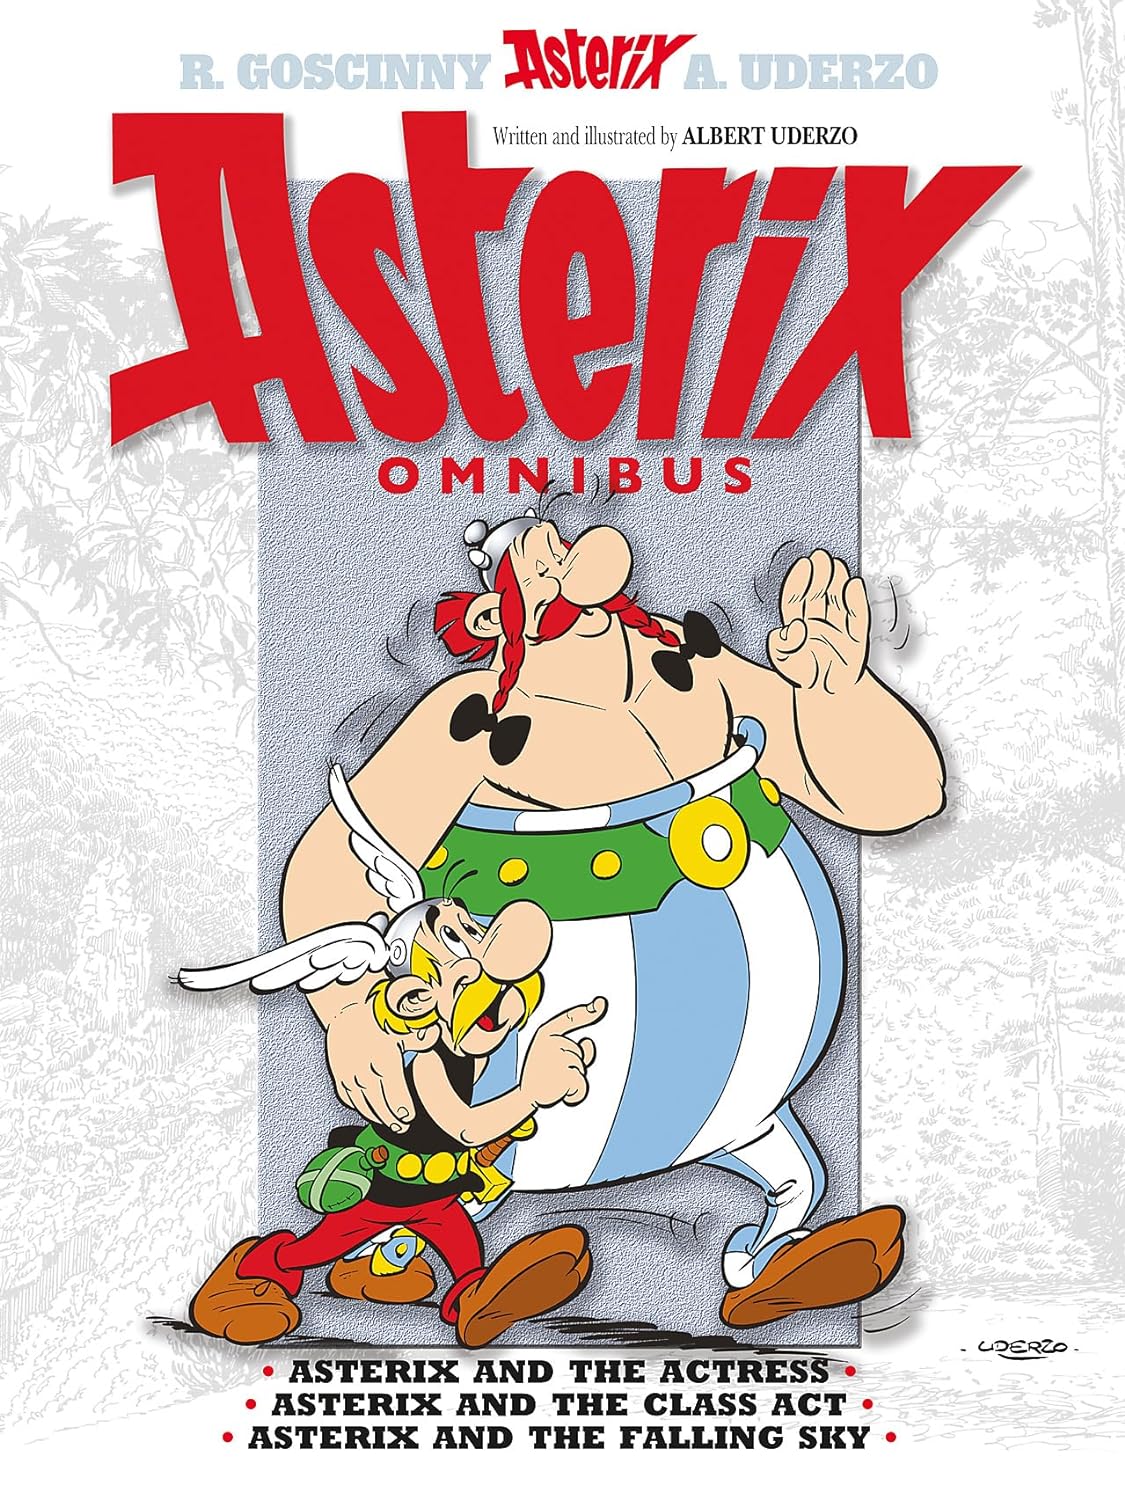 ASTERIX OMNIBUS 11 : ASTERIX AND THE ACTRESS, ASTERIX AND THE CLASS ACT, ASTERIX AND THE FALLING SKY